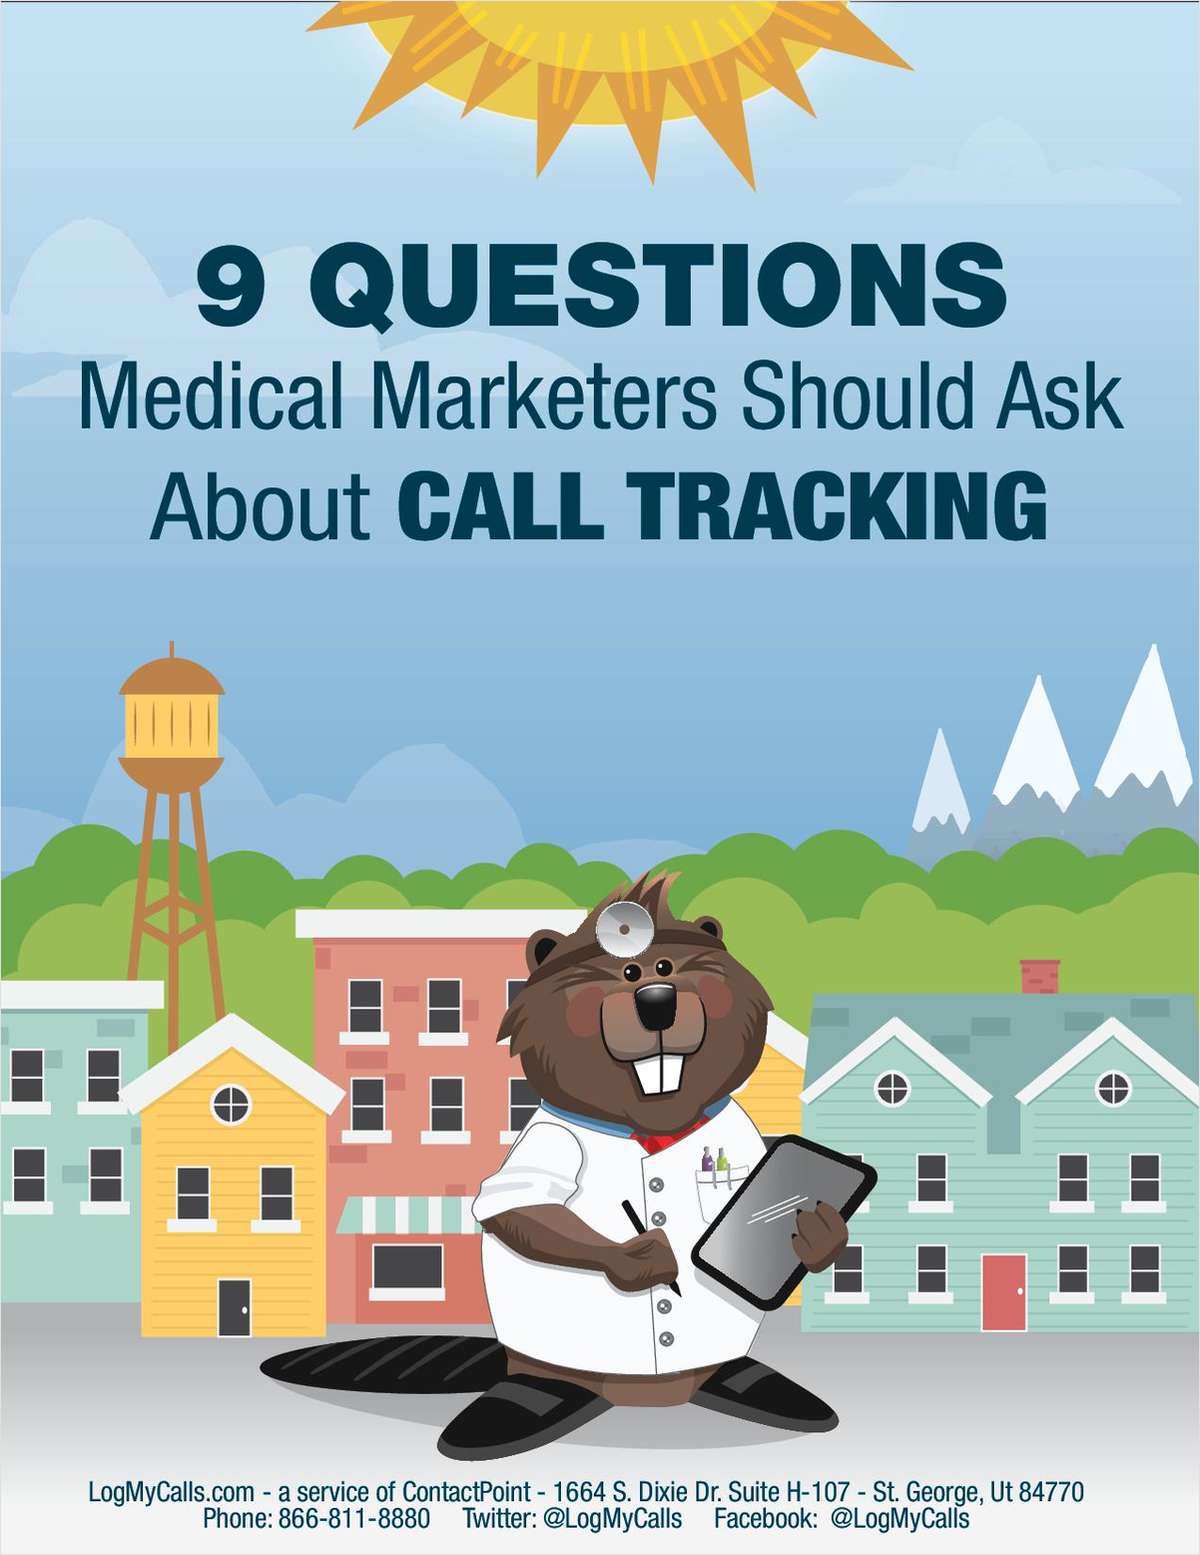 9 Questions Medical Marketers Should Ask About Call Tracking